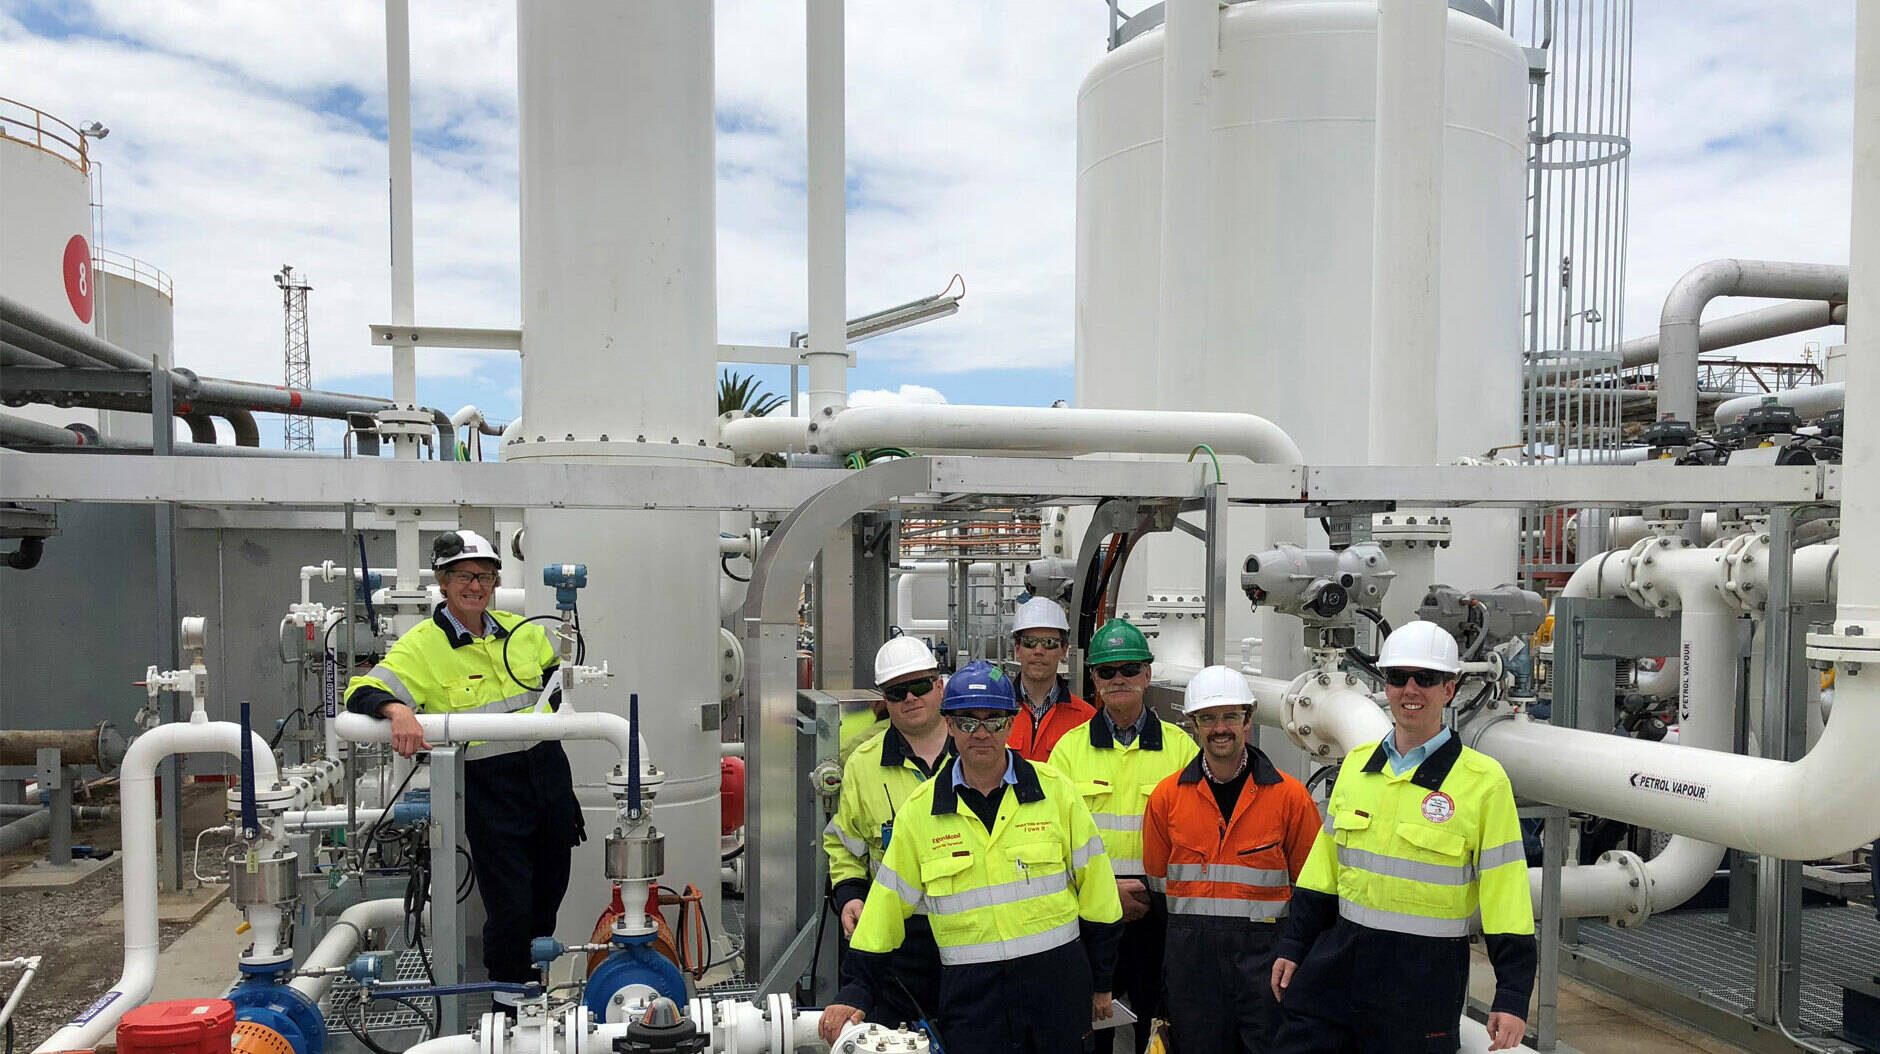 Image Photo  Yarraville Terminal now operates with a reduced environmental footprint and an increased ability to service Australias growing fuel needs.